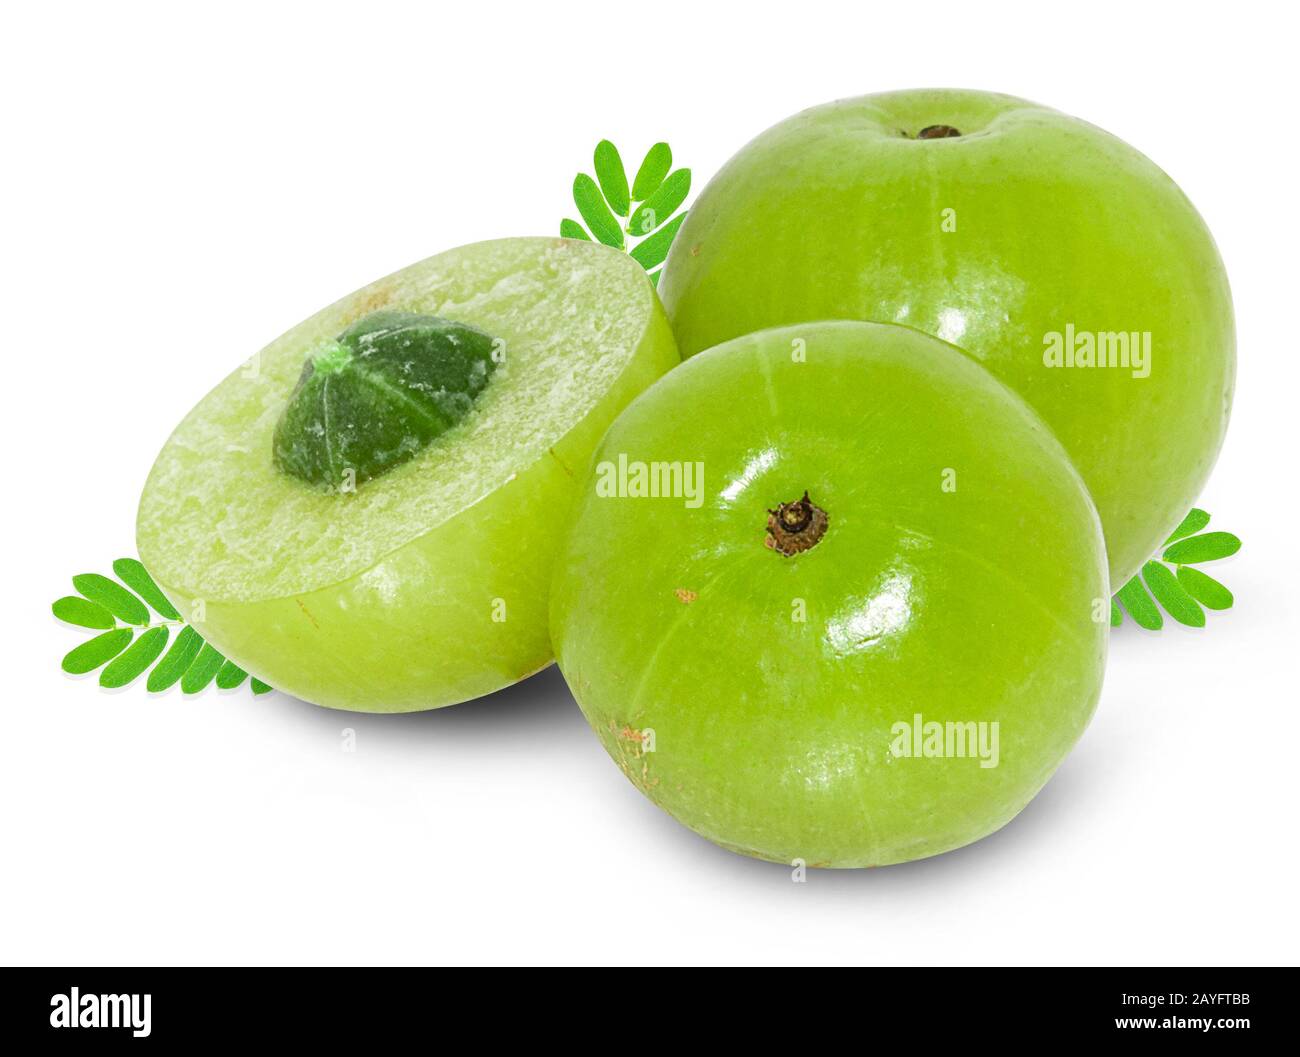 Amla green fruits ,Phyllanthus emblica isolated on white background. This has clipping path. Stock Photo